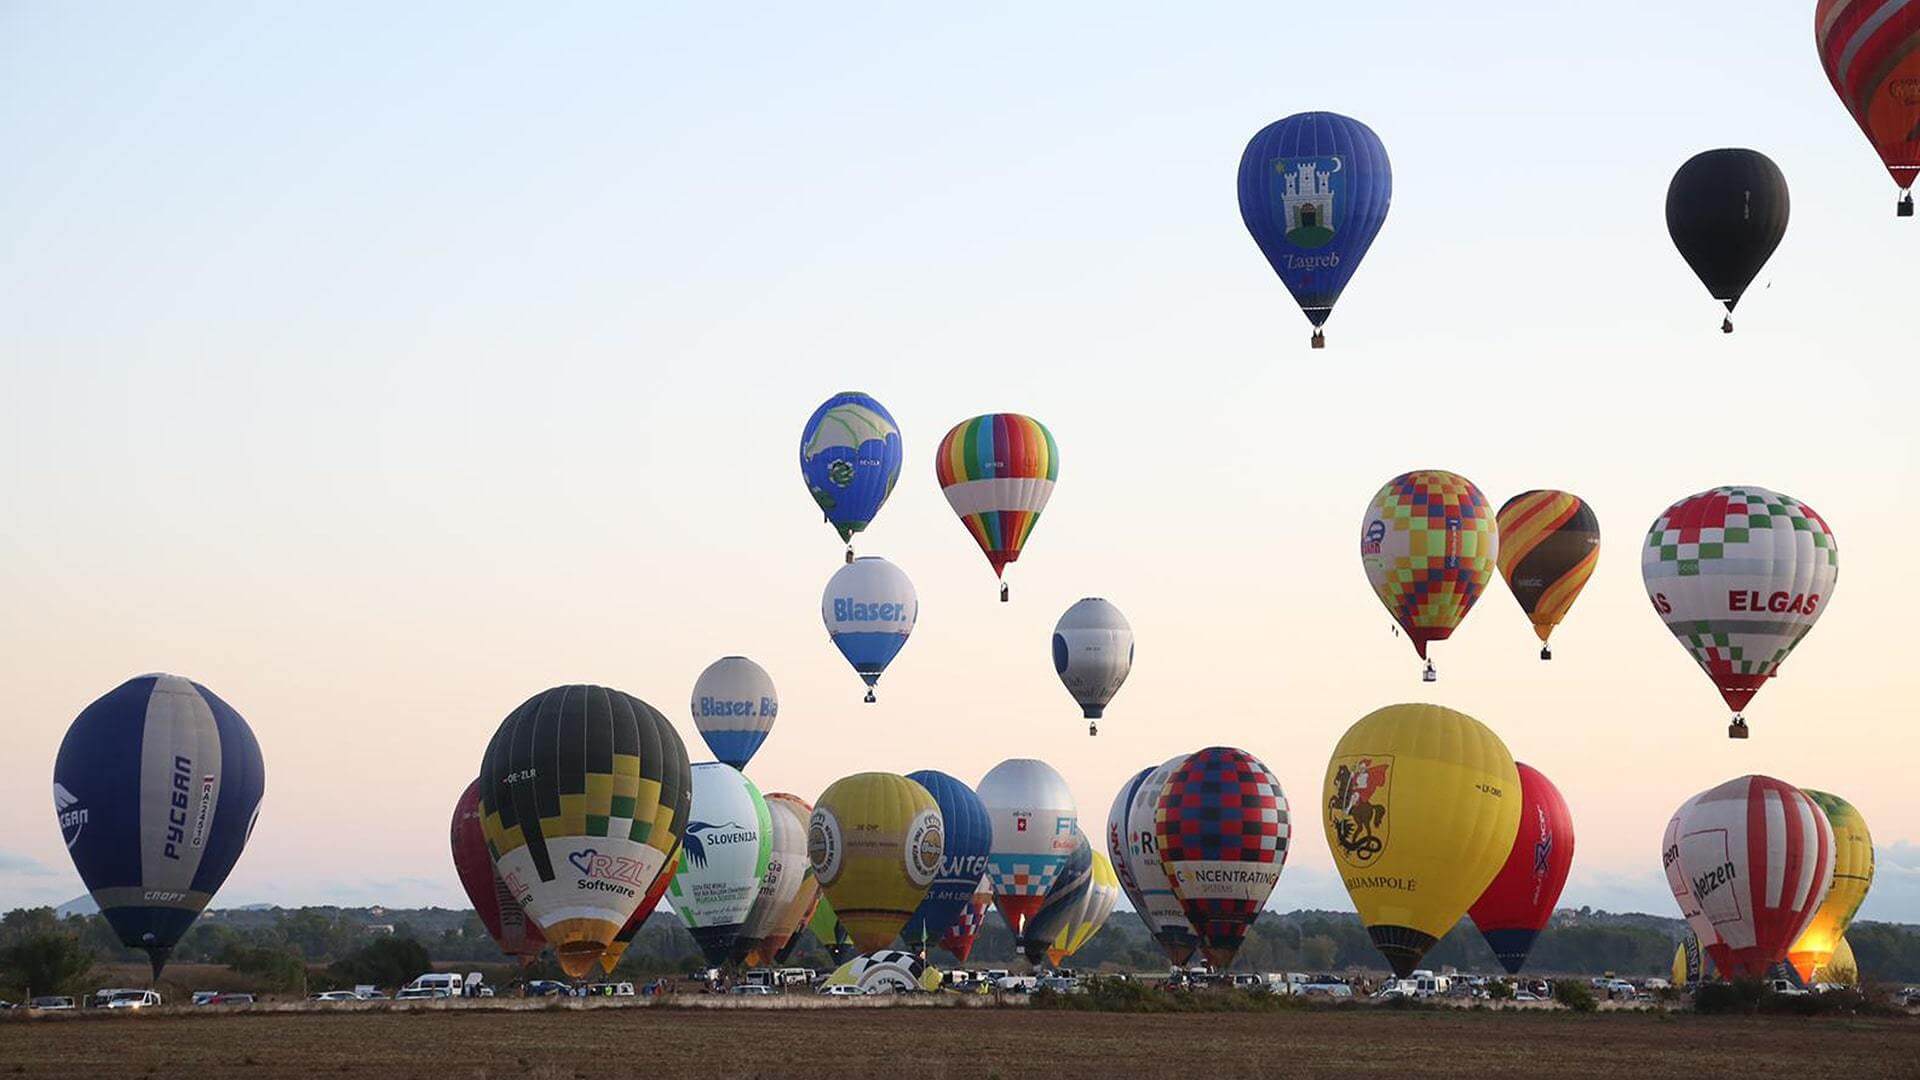 Balloons taking off from Malllorca field during the championships min